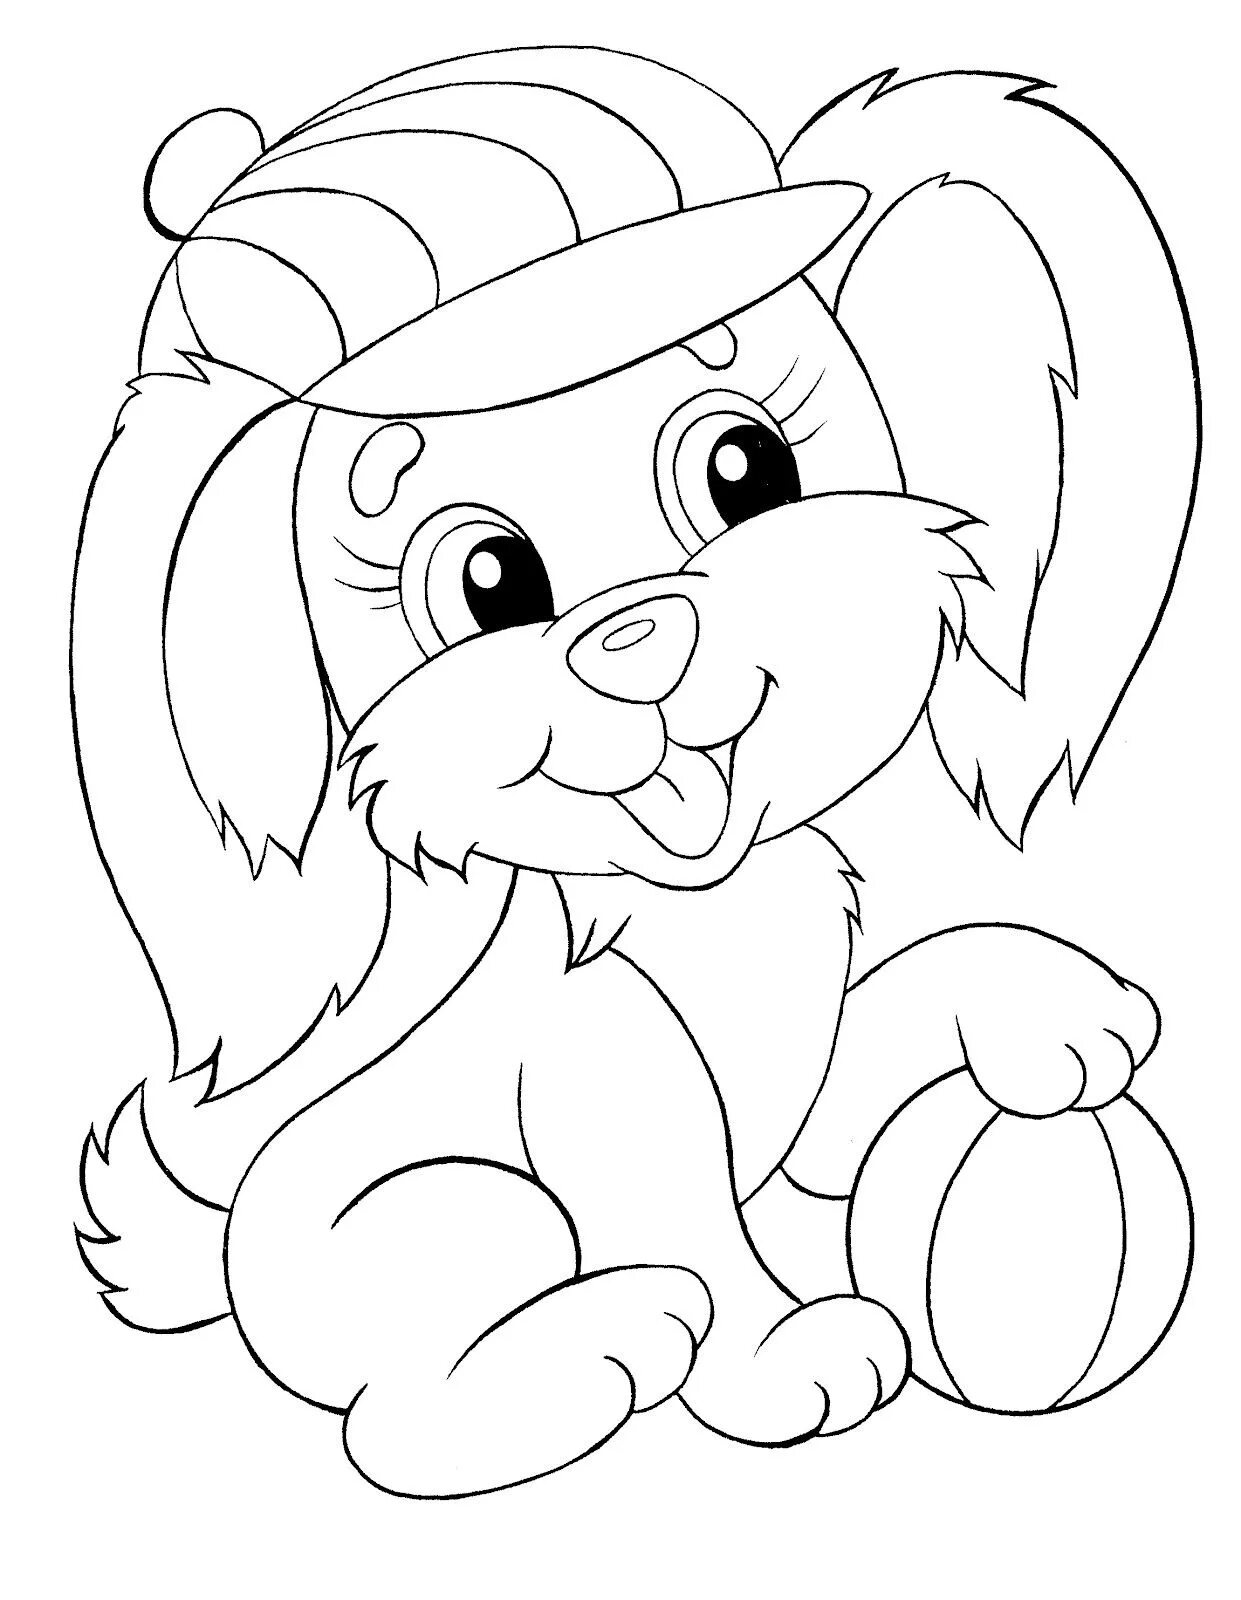 Glowing printable coloring pages for kids